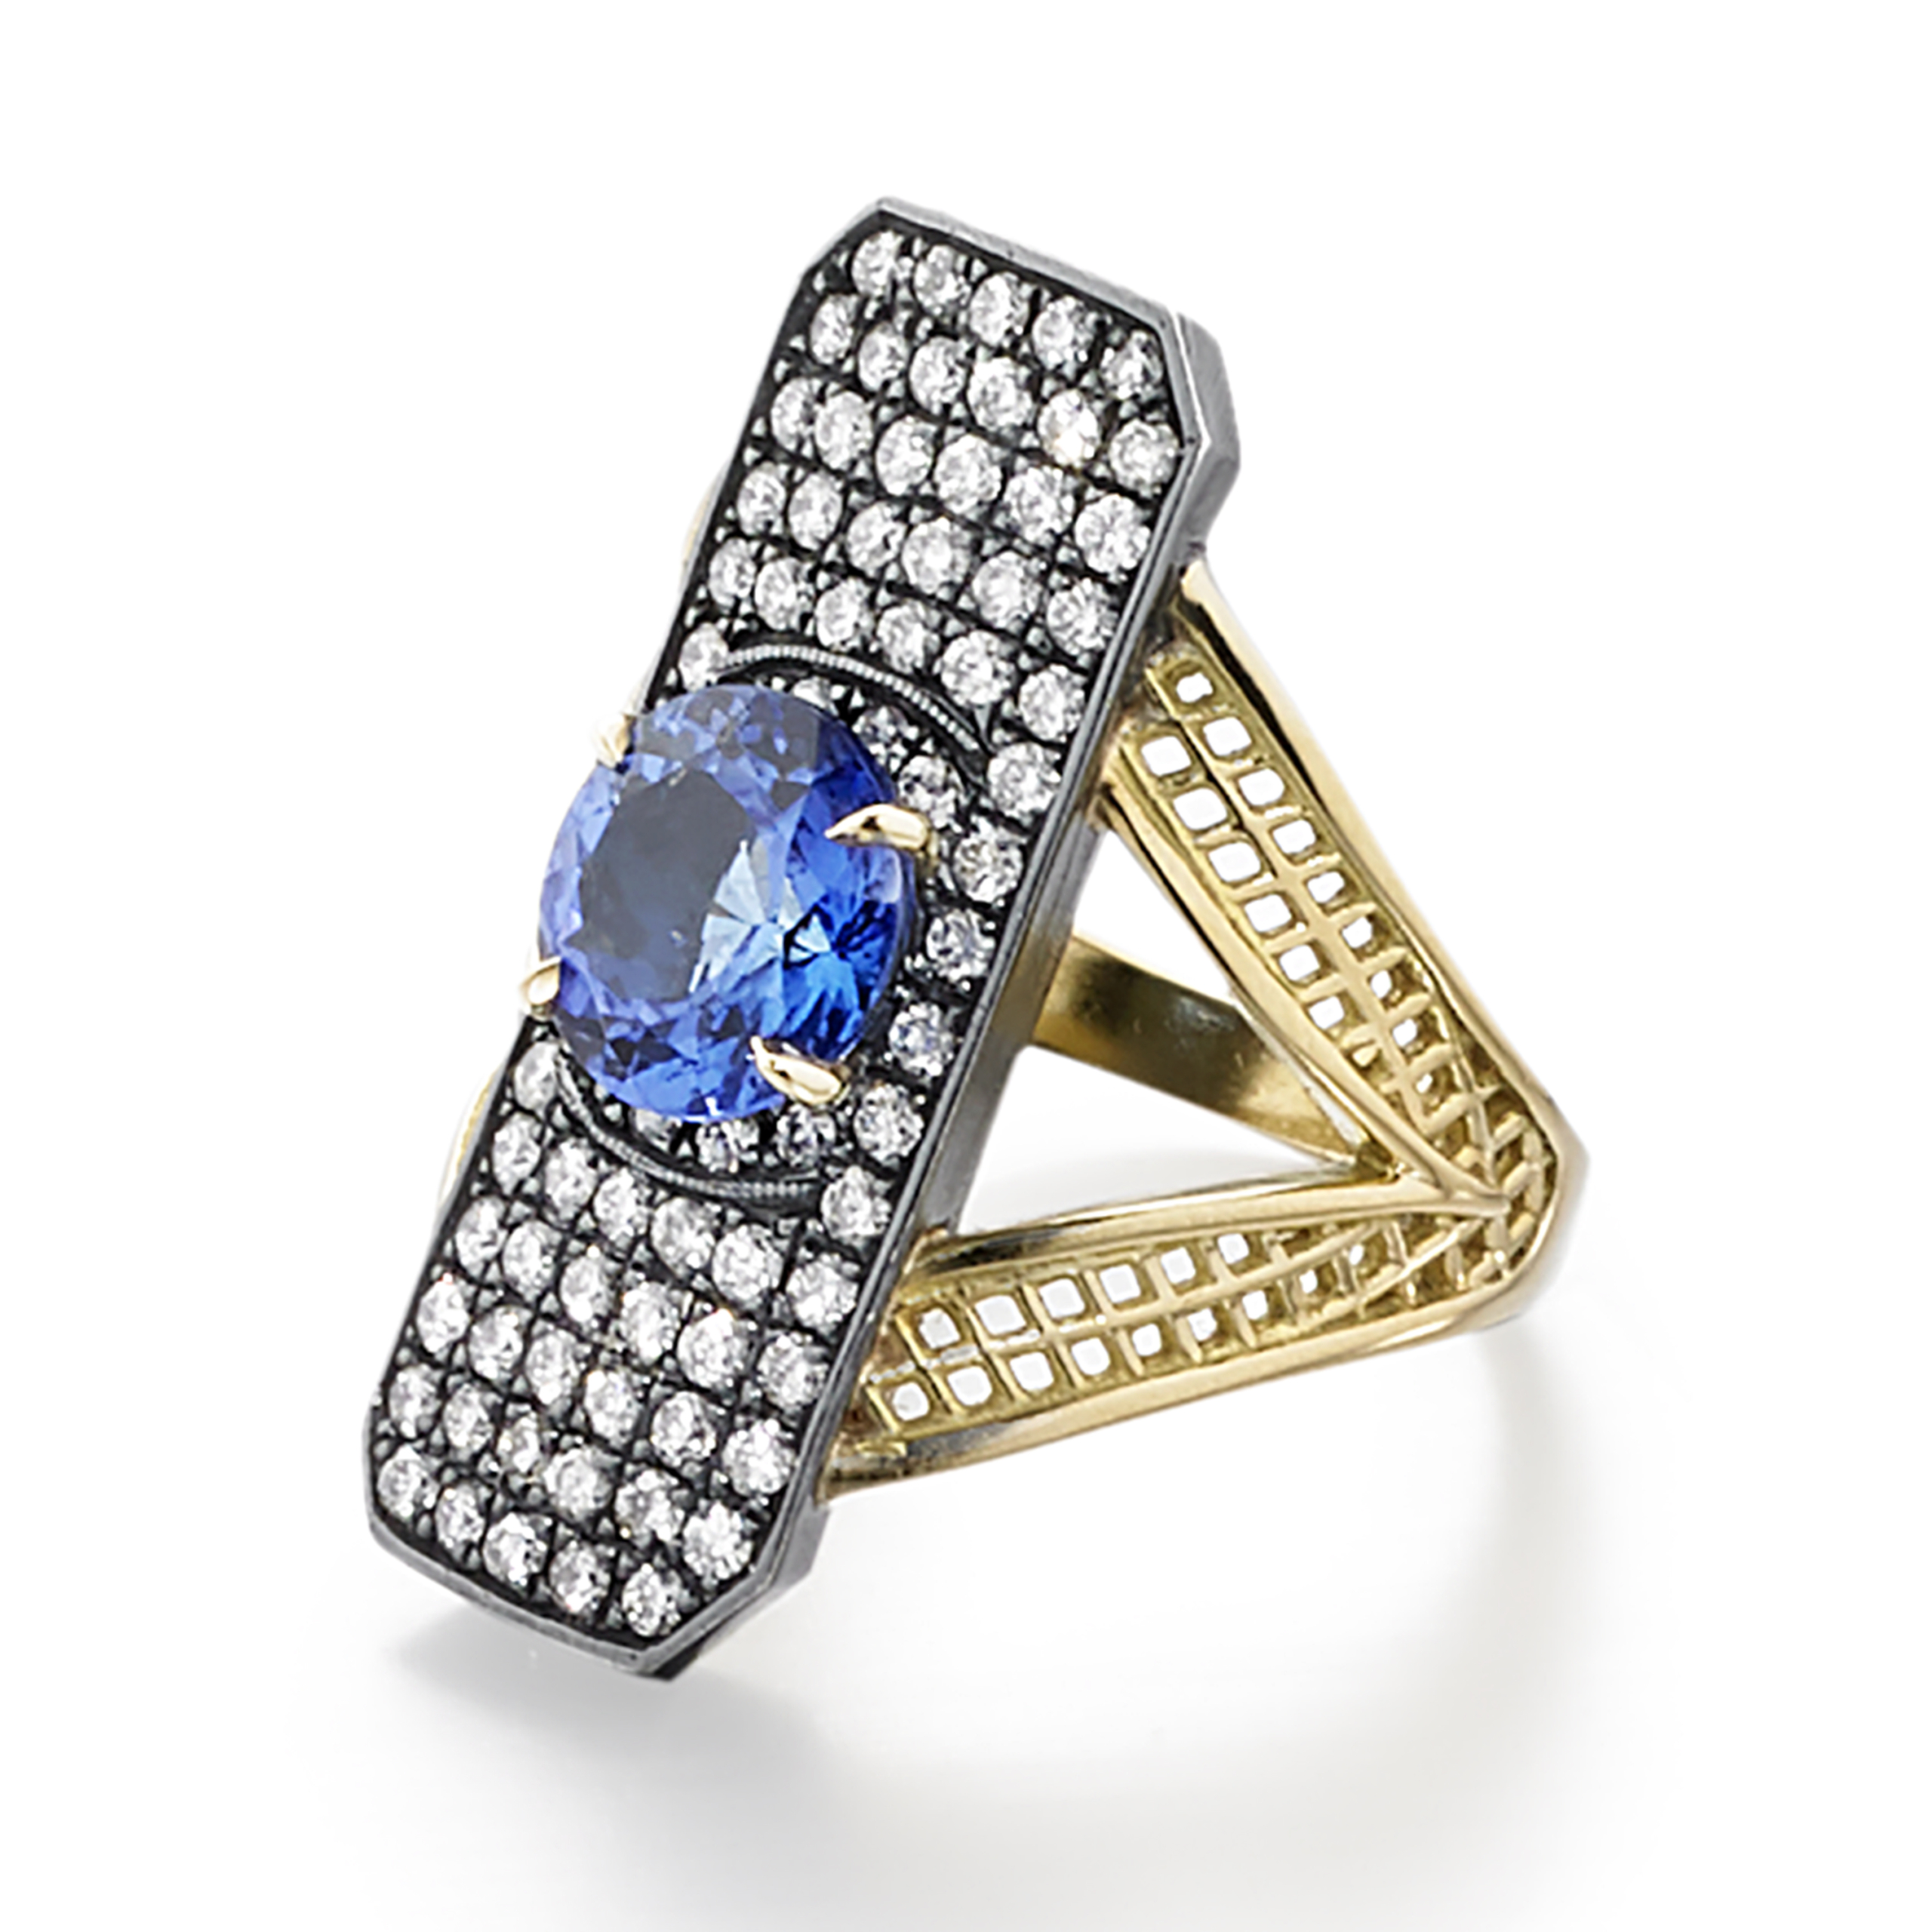 This is a photo of an 18k yellow gold Crownwork Edwardian ring with prong set tanzanite center and pave diamond surround in oxidized silver